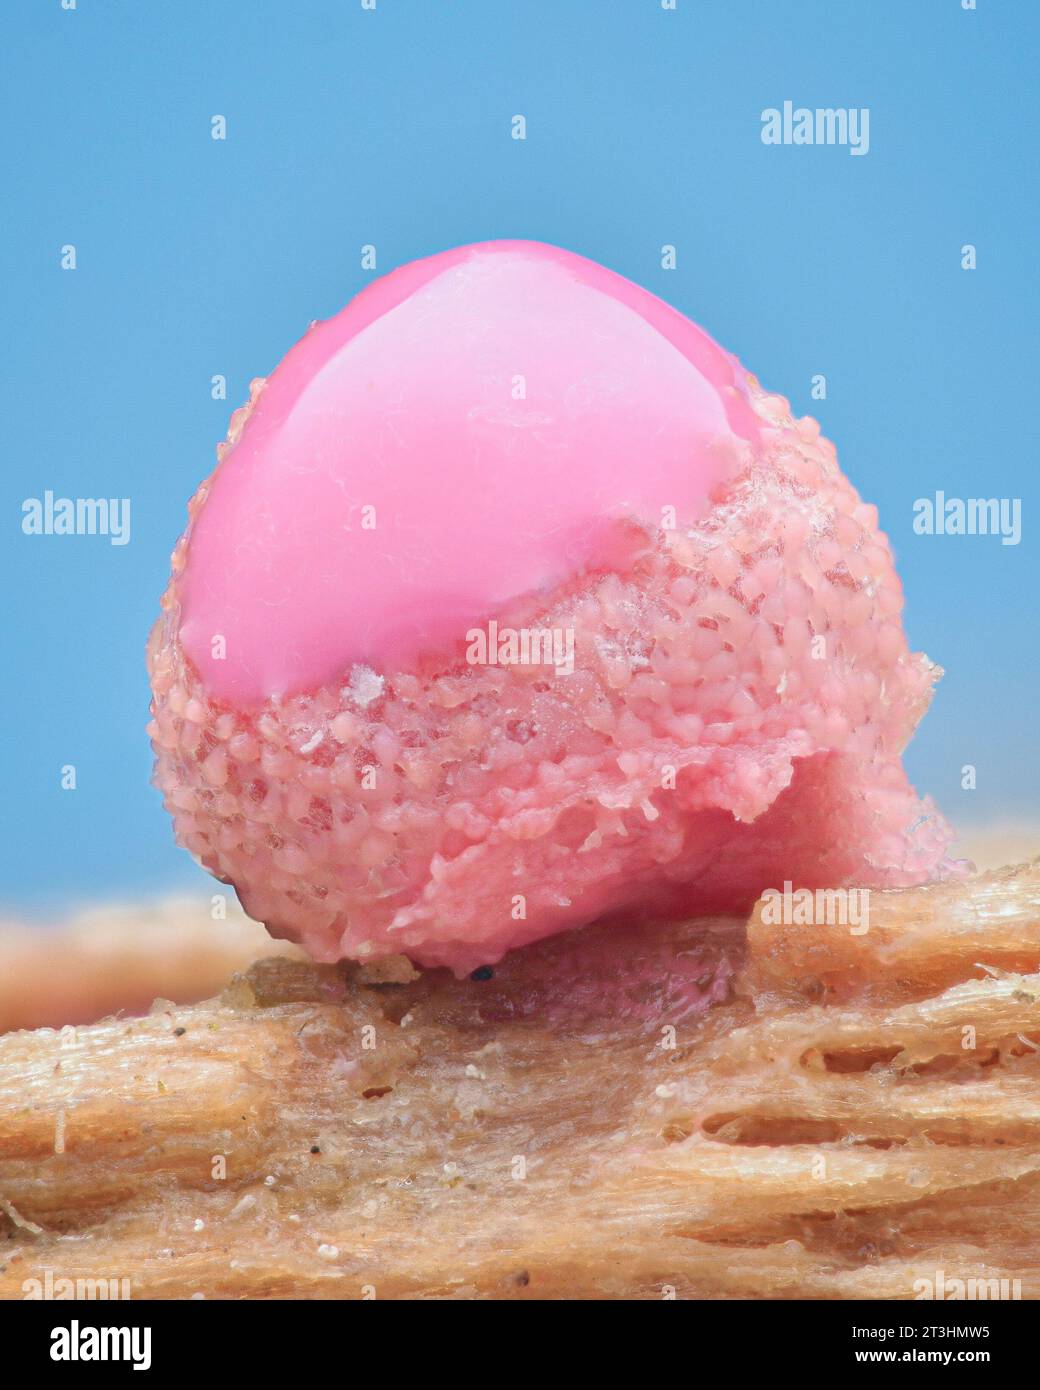 Close up of a young, pink fruiting body of the slime mold amoeba Wolf's Milk (Lycogala epidendrum) oozing out a pink paste, blue background Stock Photo